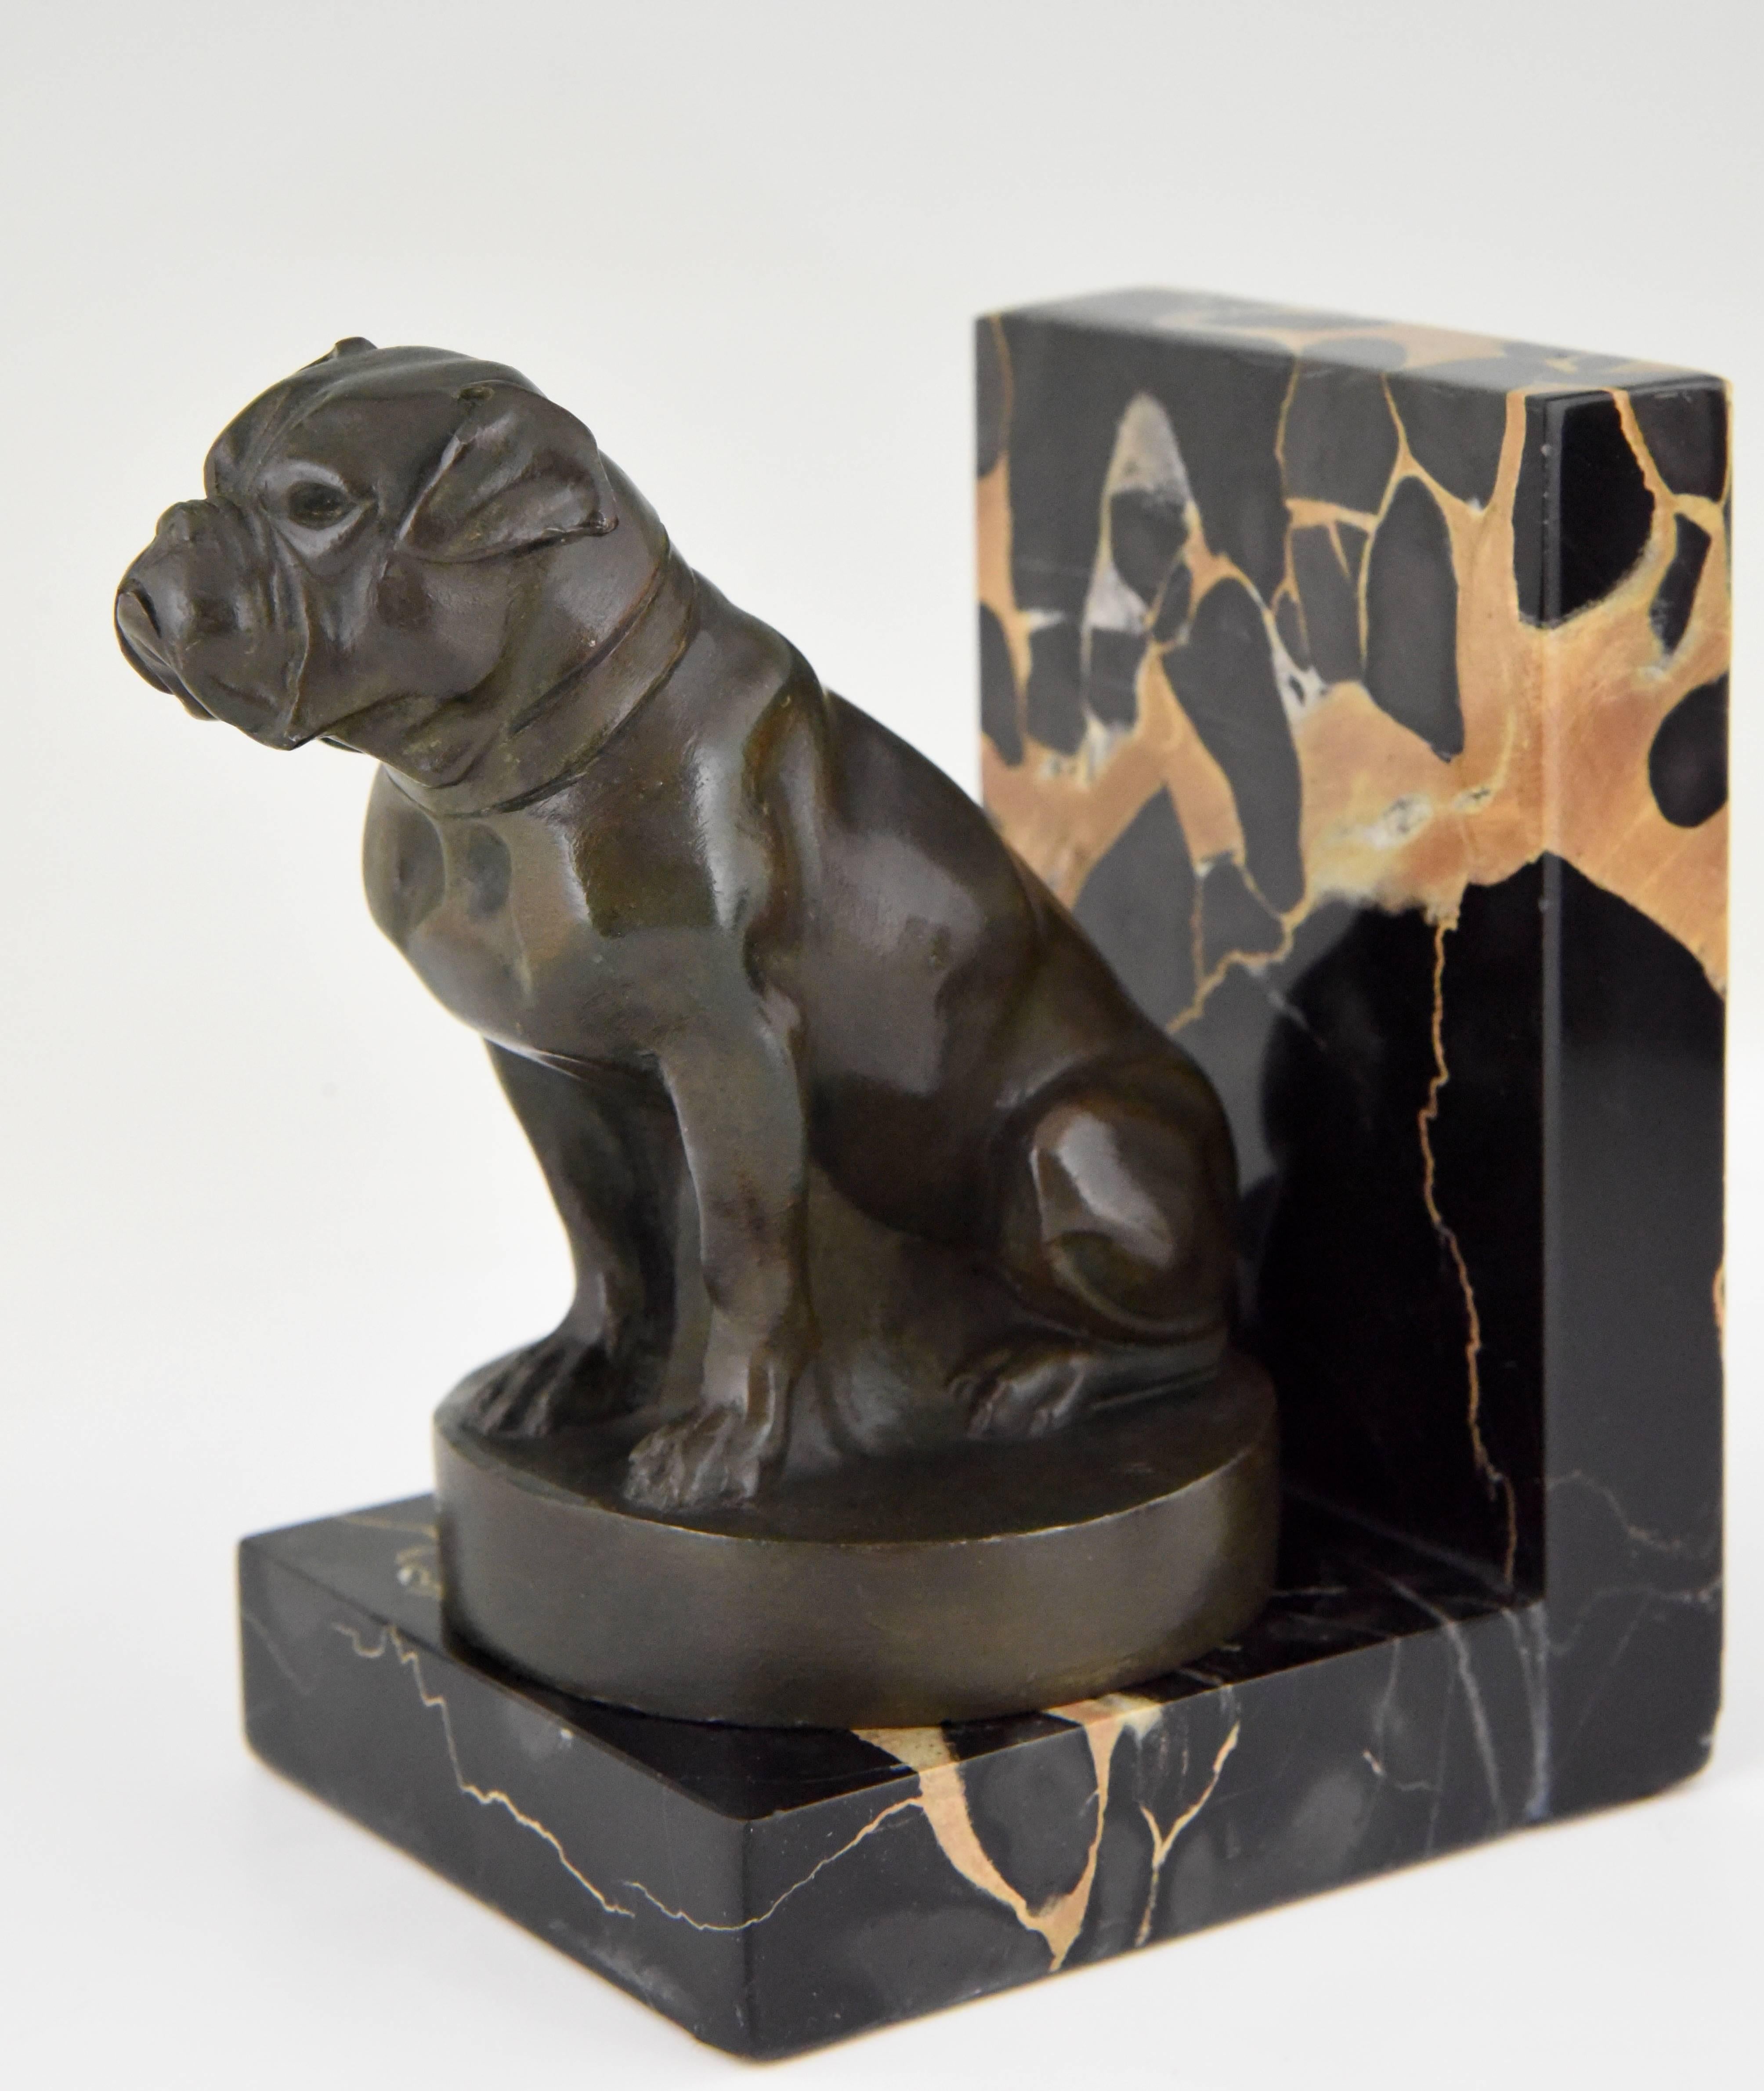 20th Century Art Deco Bulldog Bookends by Max Le Verrier, France, 1930